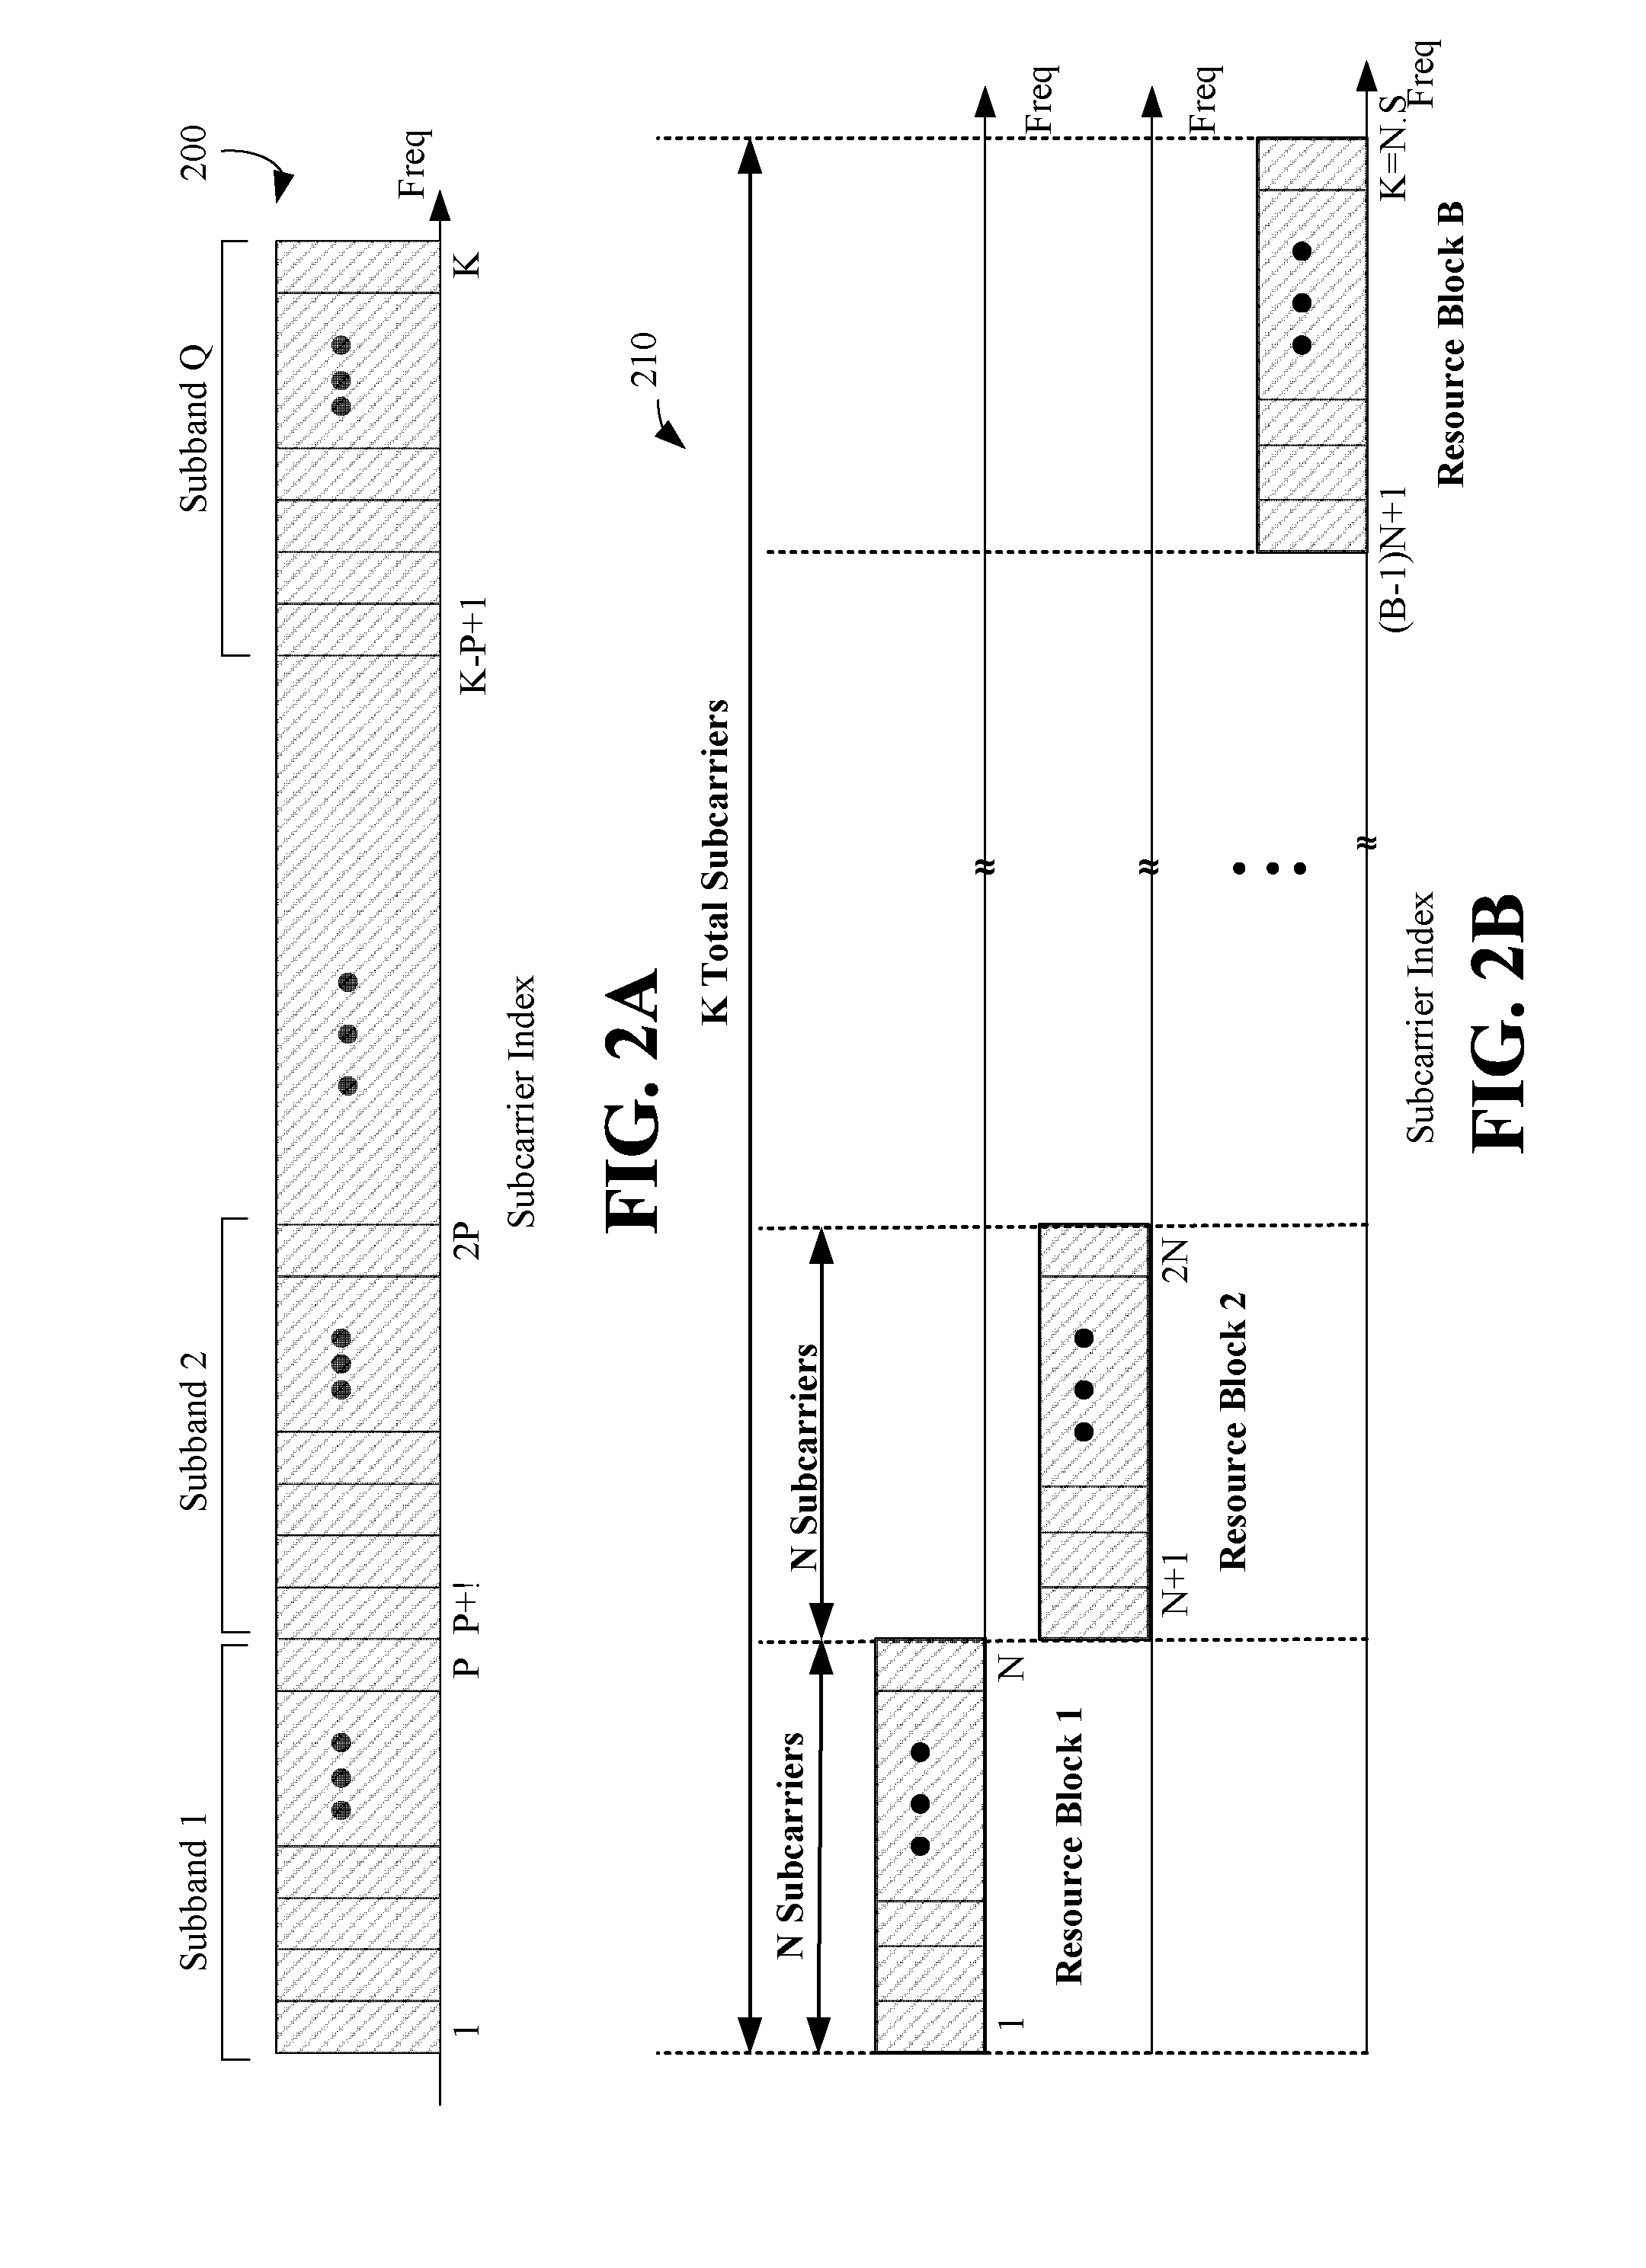 Joint use of multi-carrier and single-carrier multiplexing schemes for wireless communication